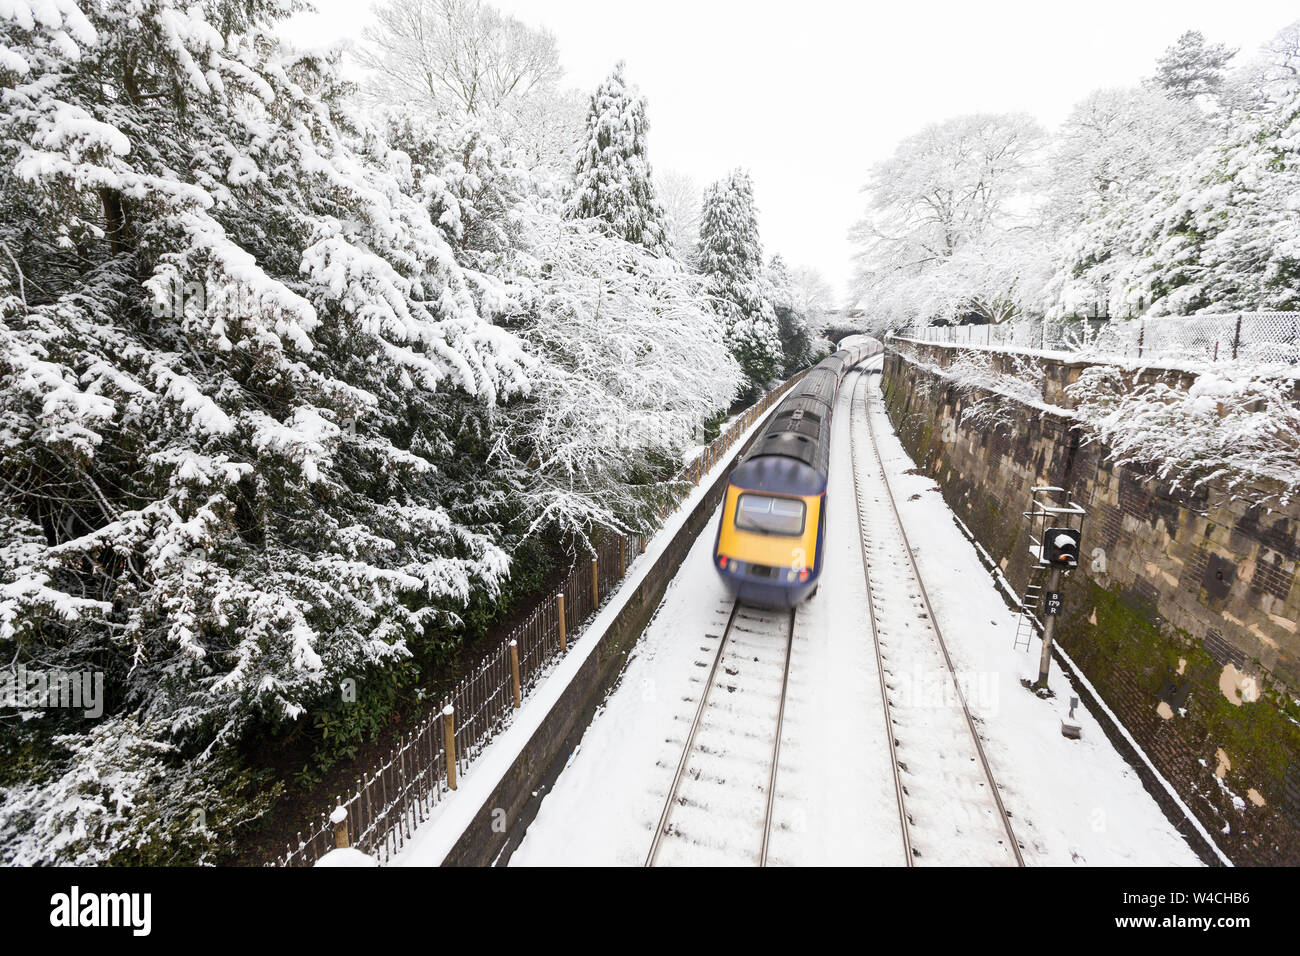 A British Intercity train travelling at speed on a snow-covered tracks through Sydney Gardens, a park in Bath, United Kingdom Stock Photo